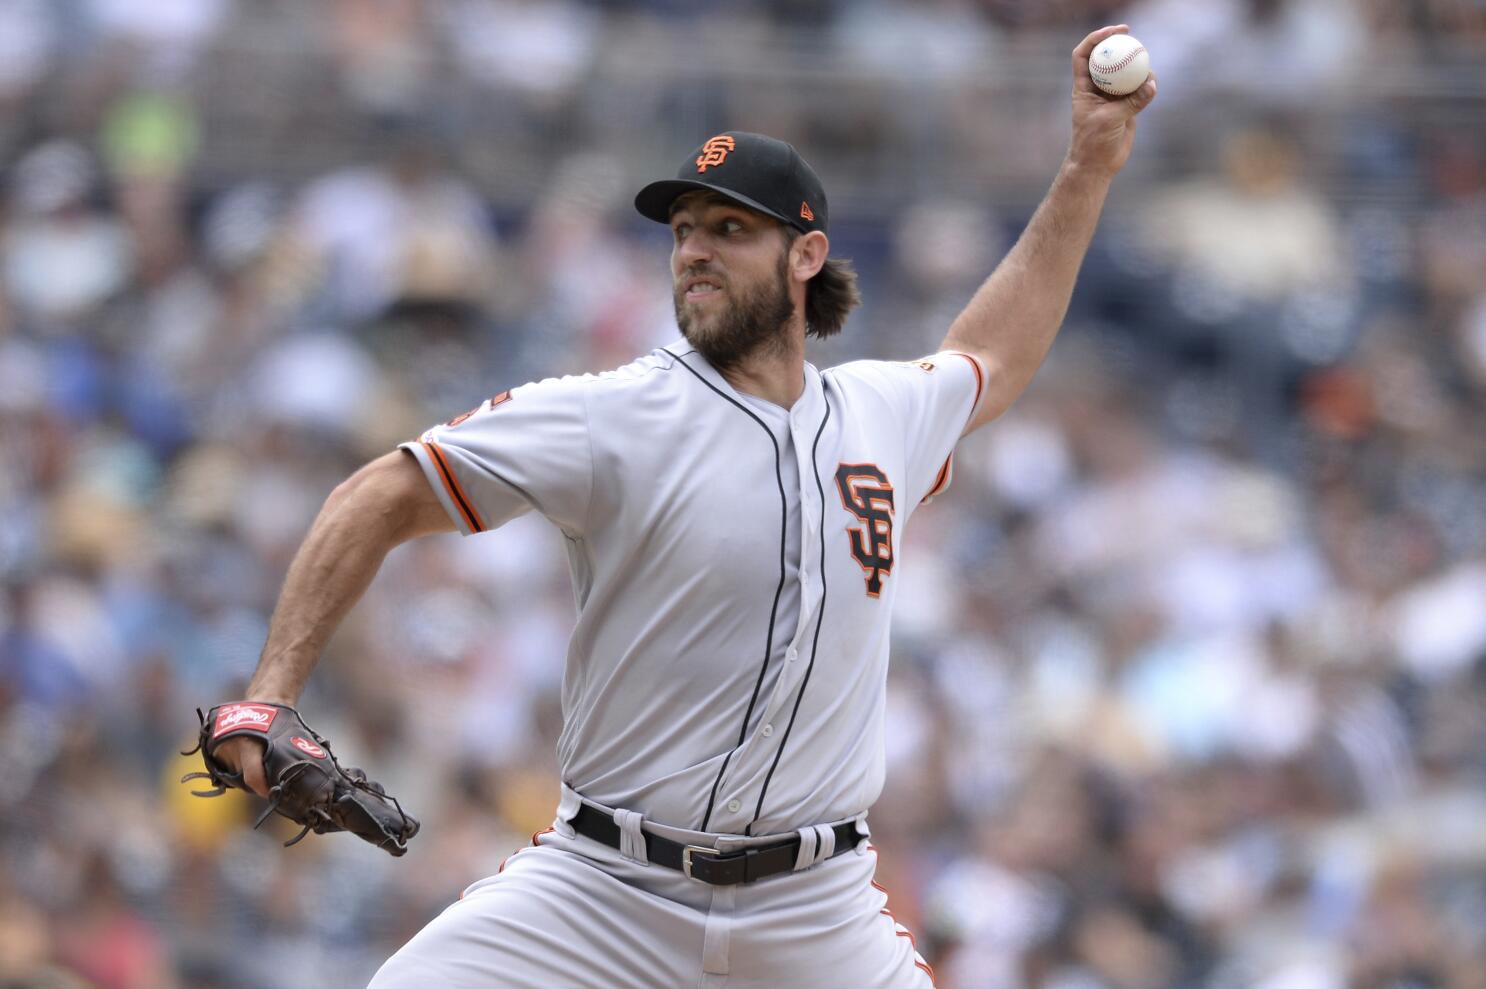 Madison Bumgarner is 1st pitcher to hit 2 home runs on opening day 